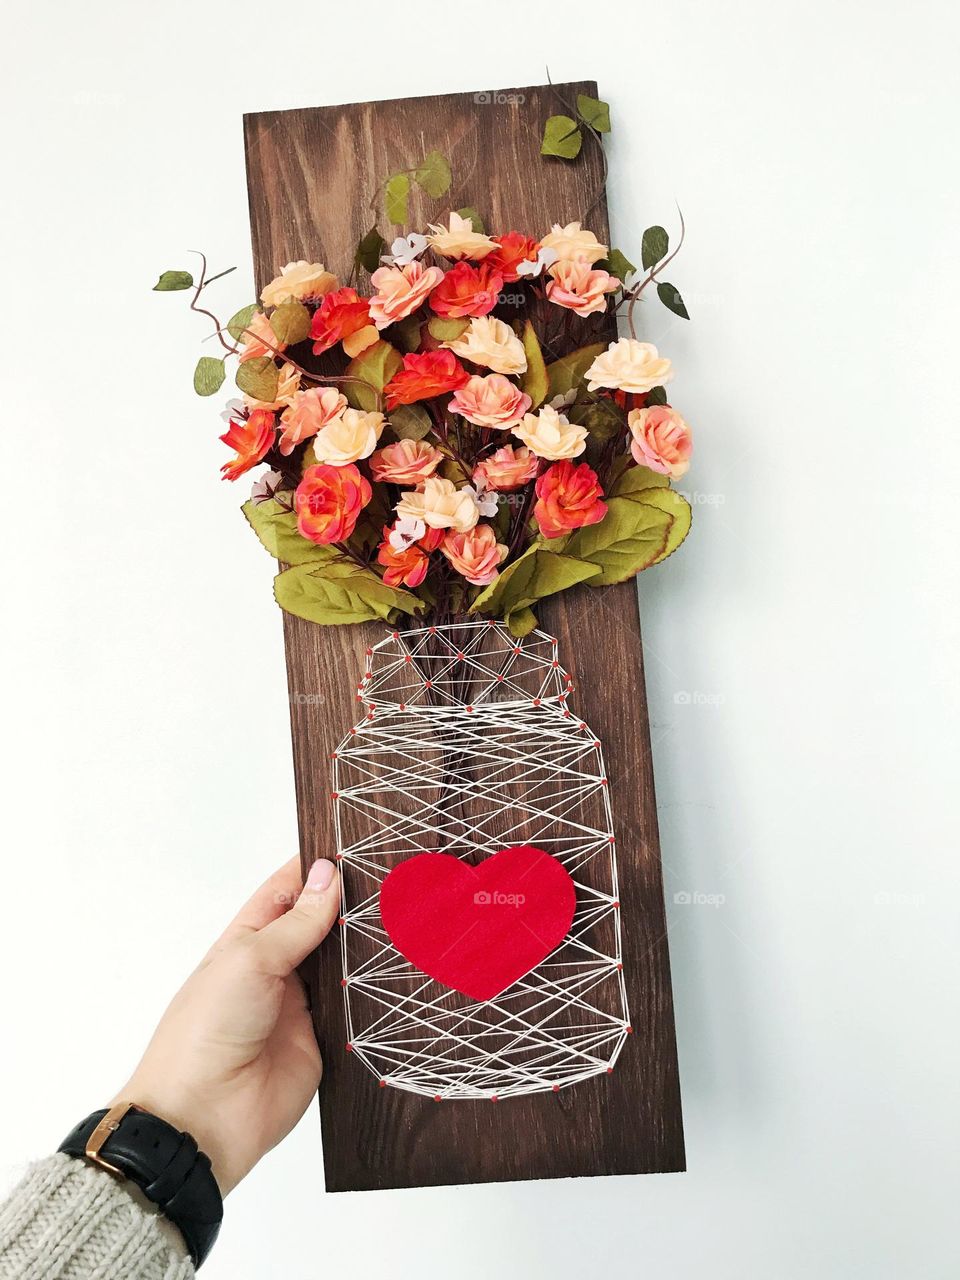 Handmade wooden wall art decor. Vase with flowers